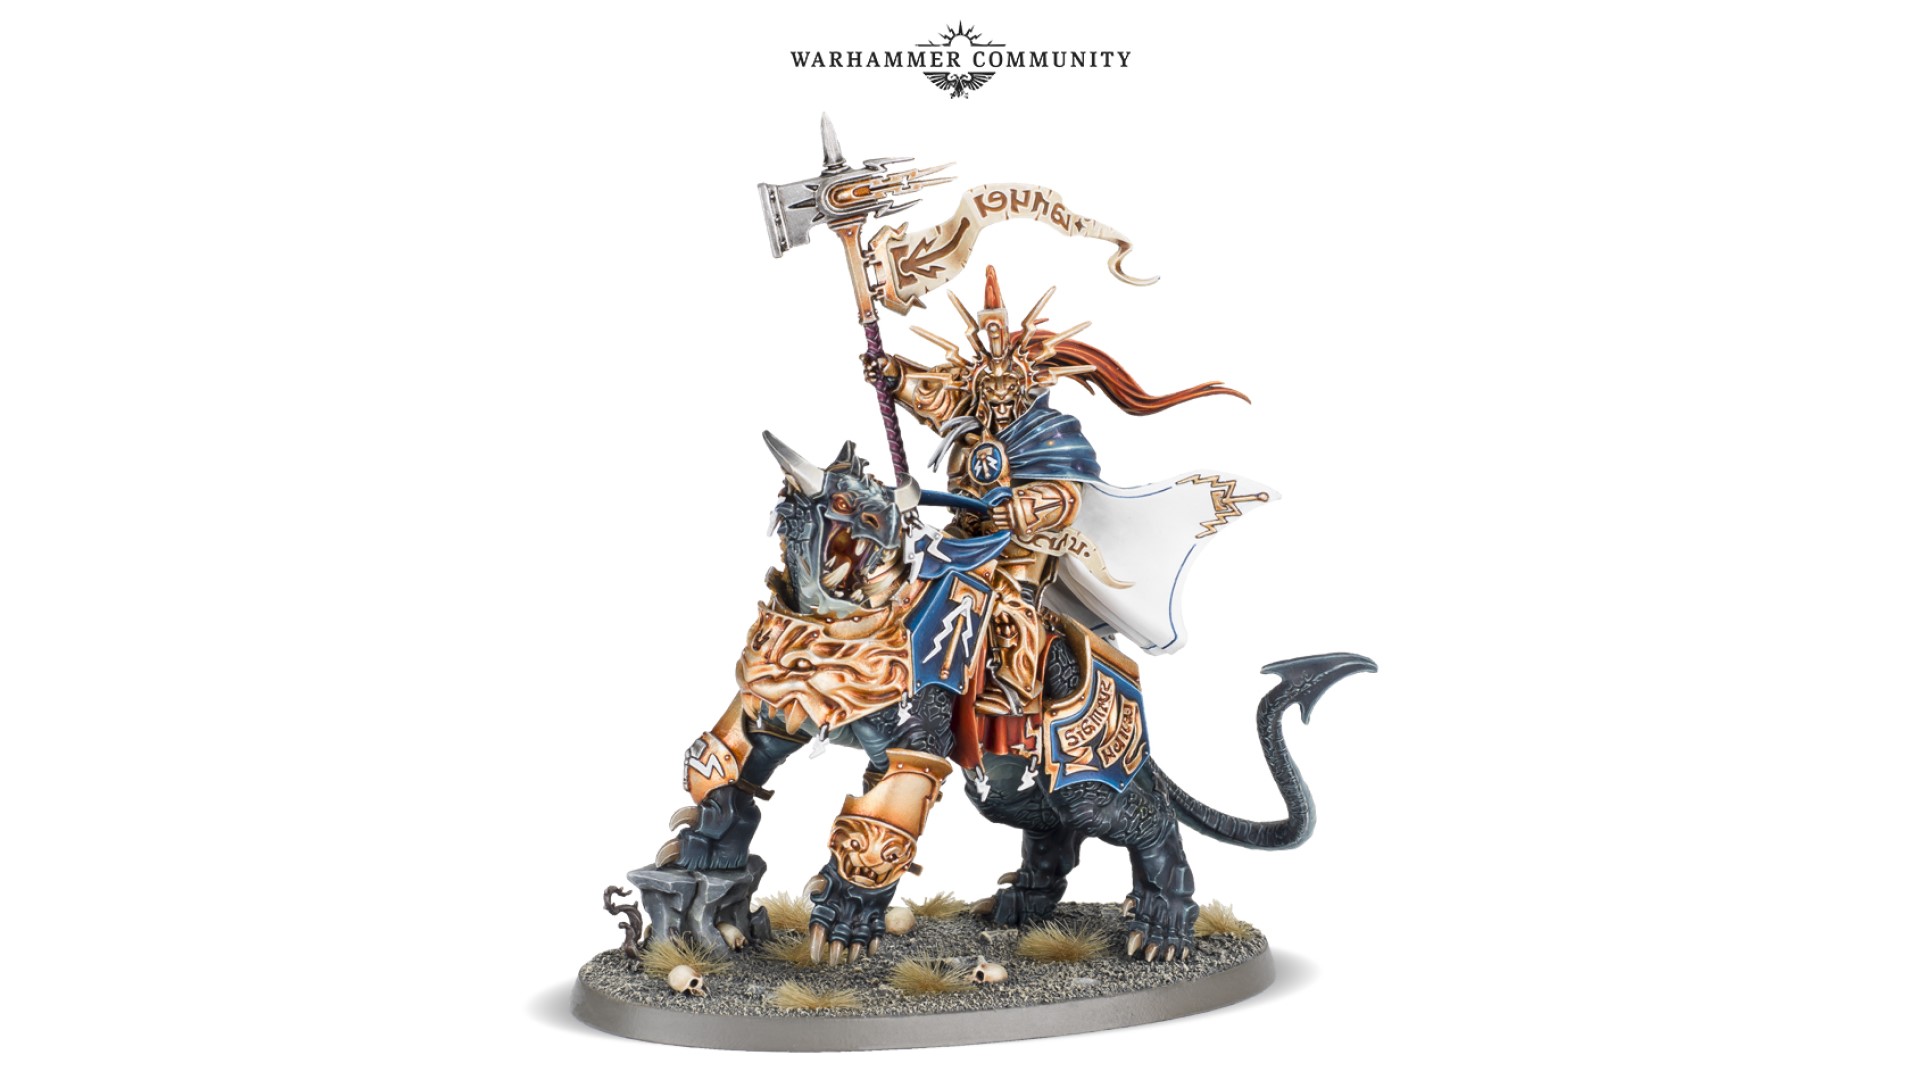 Warhammer Age of Sigmar: Stormcast Eternals lore and tactics